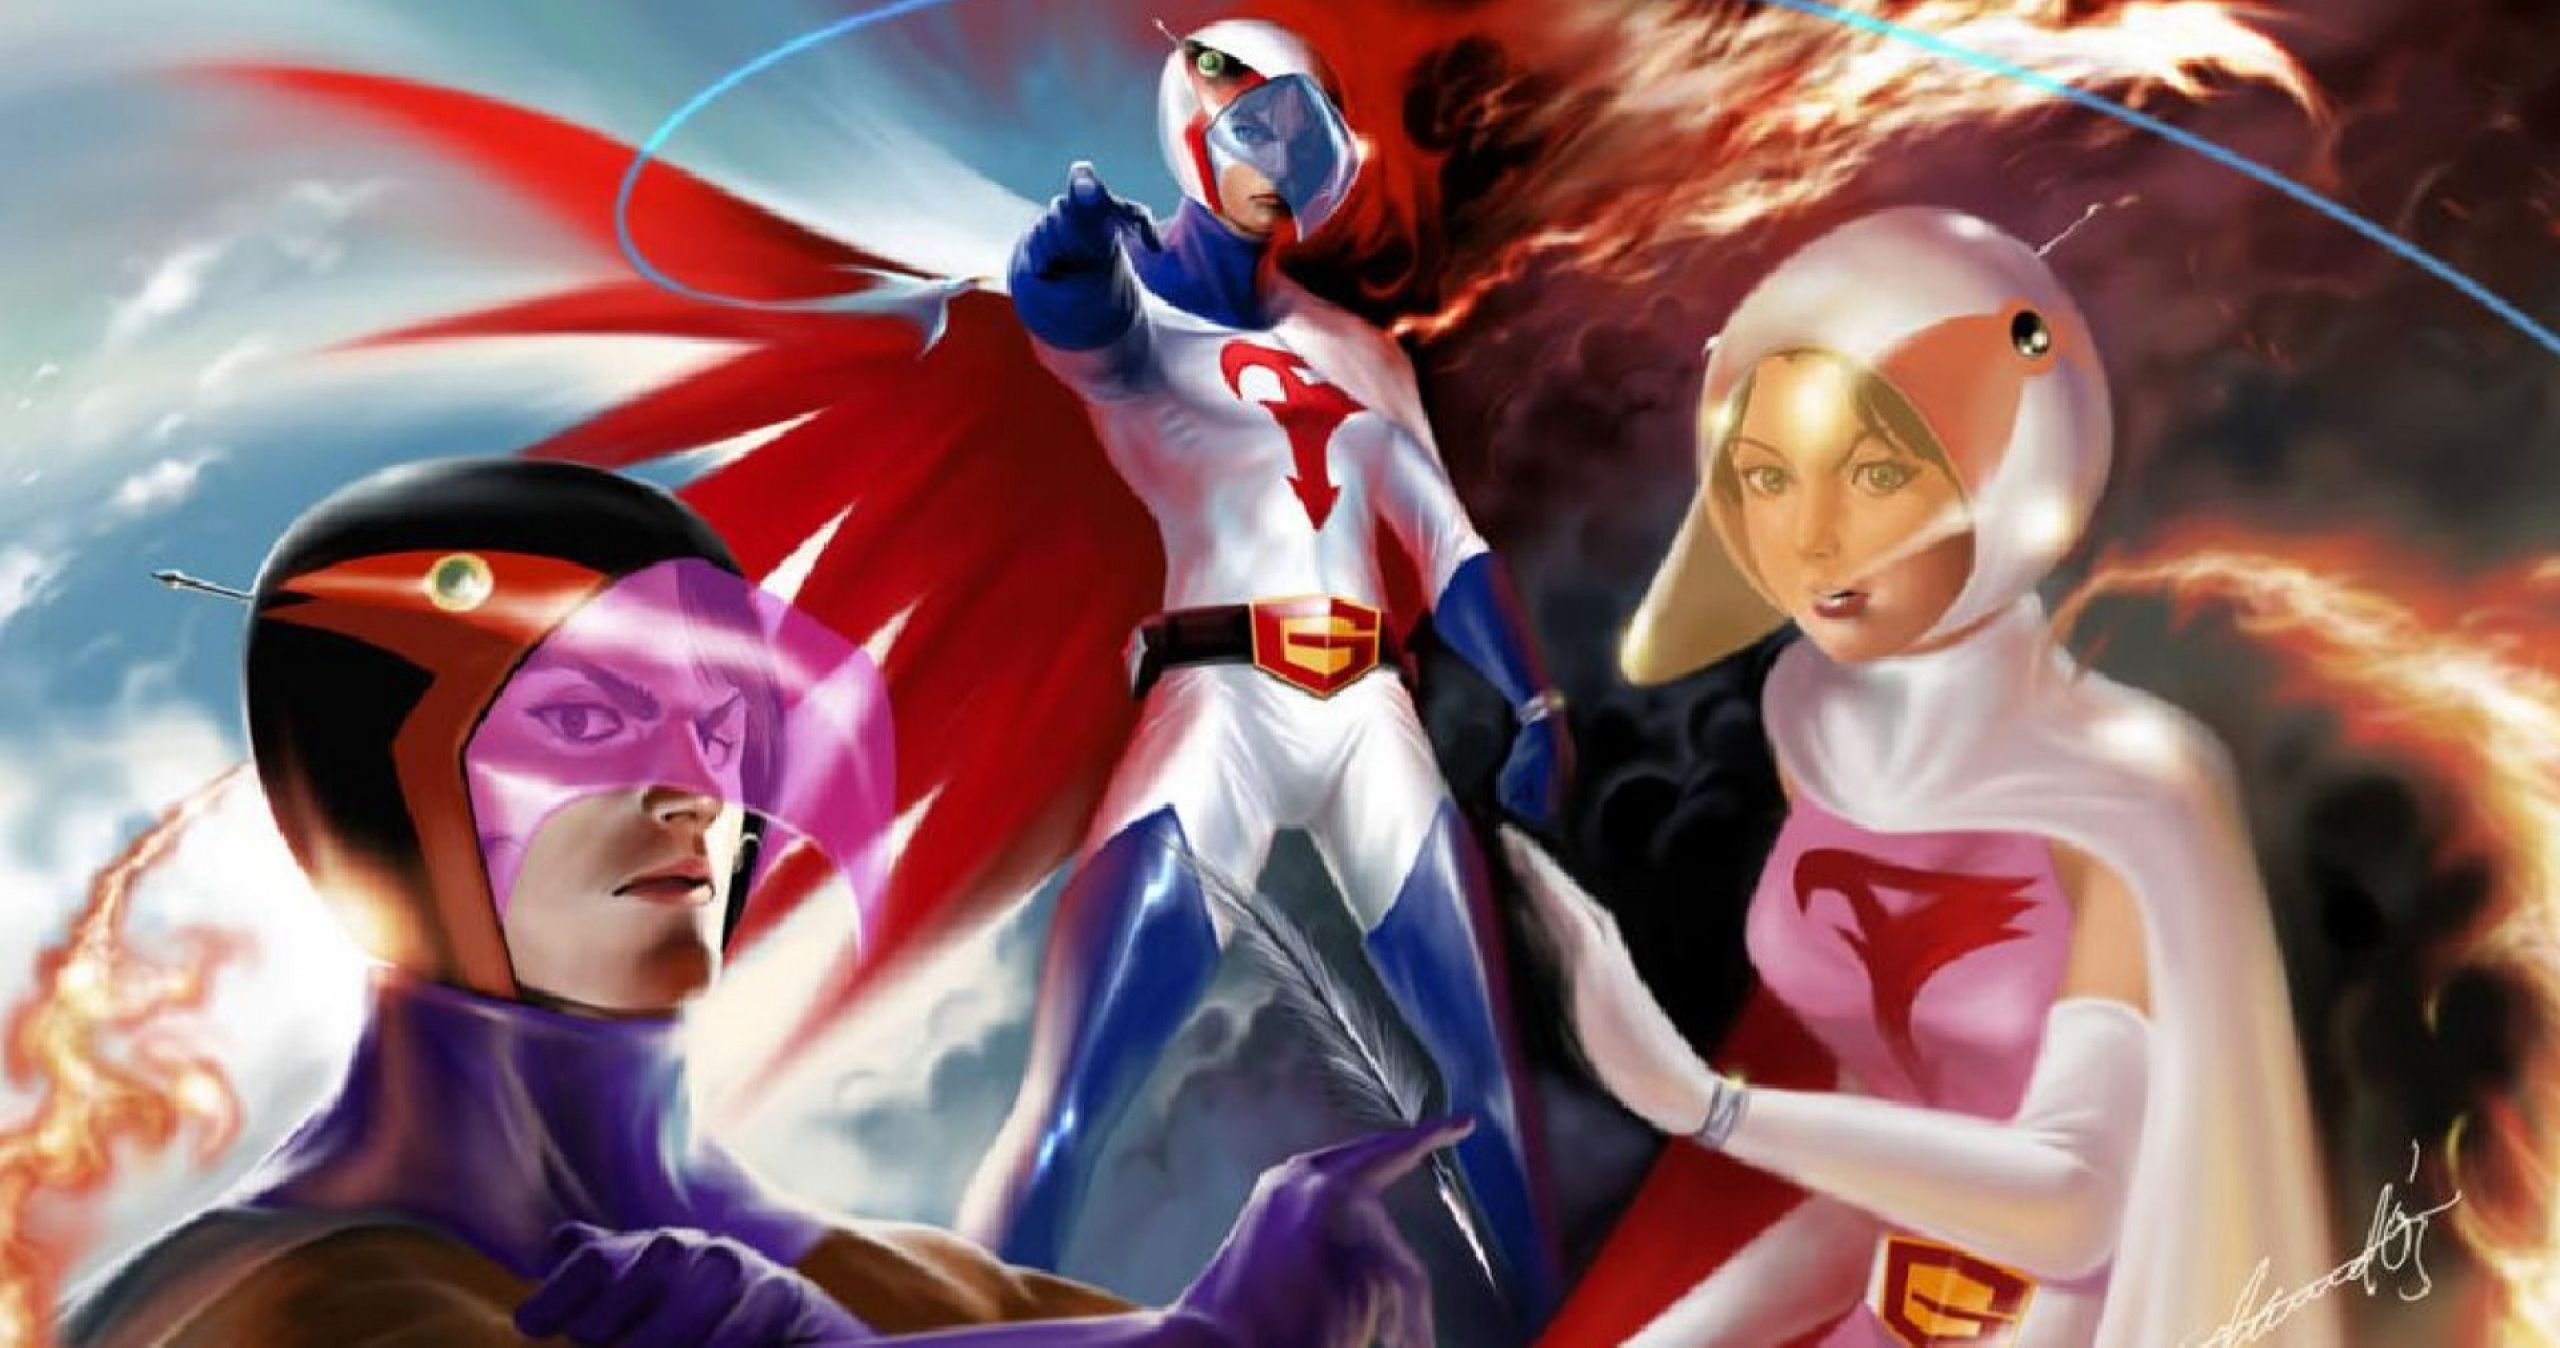 Battle of the Planets Movie Is Happening with Avengers: Endgame Directors